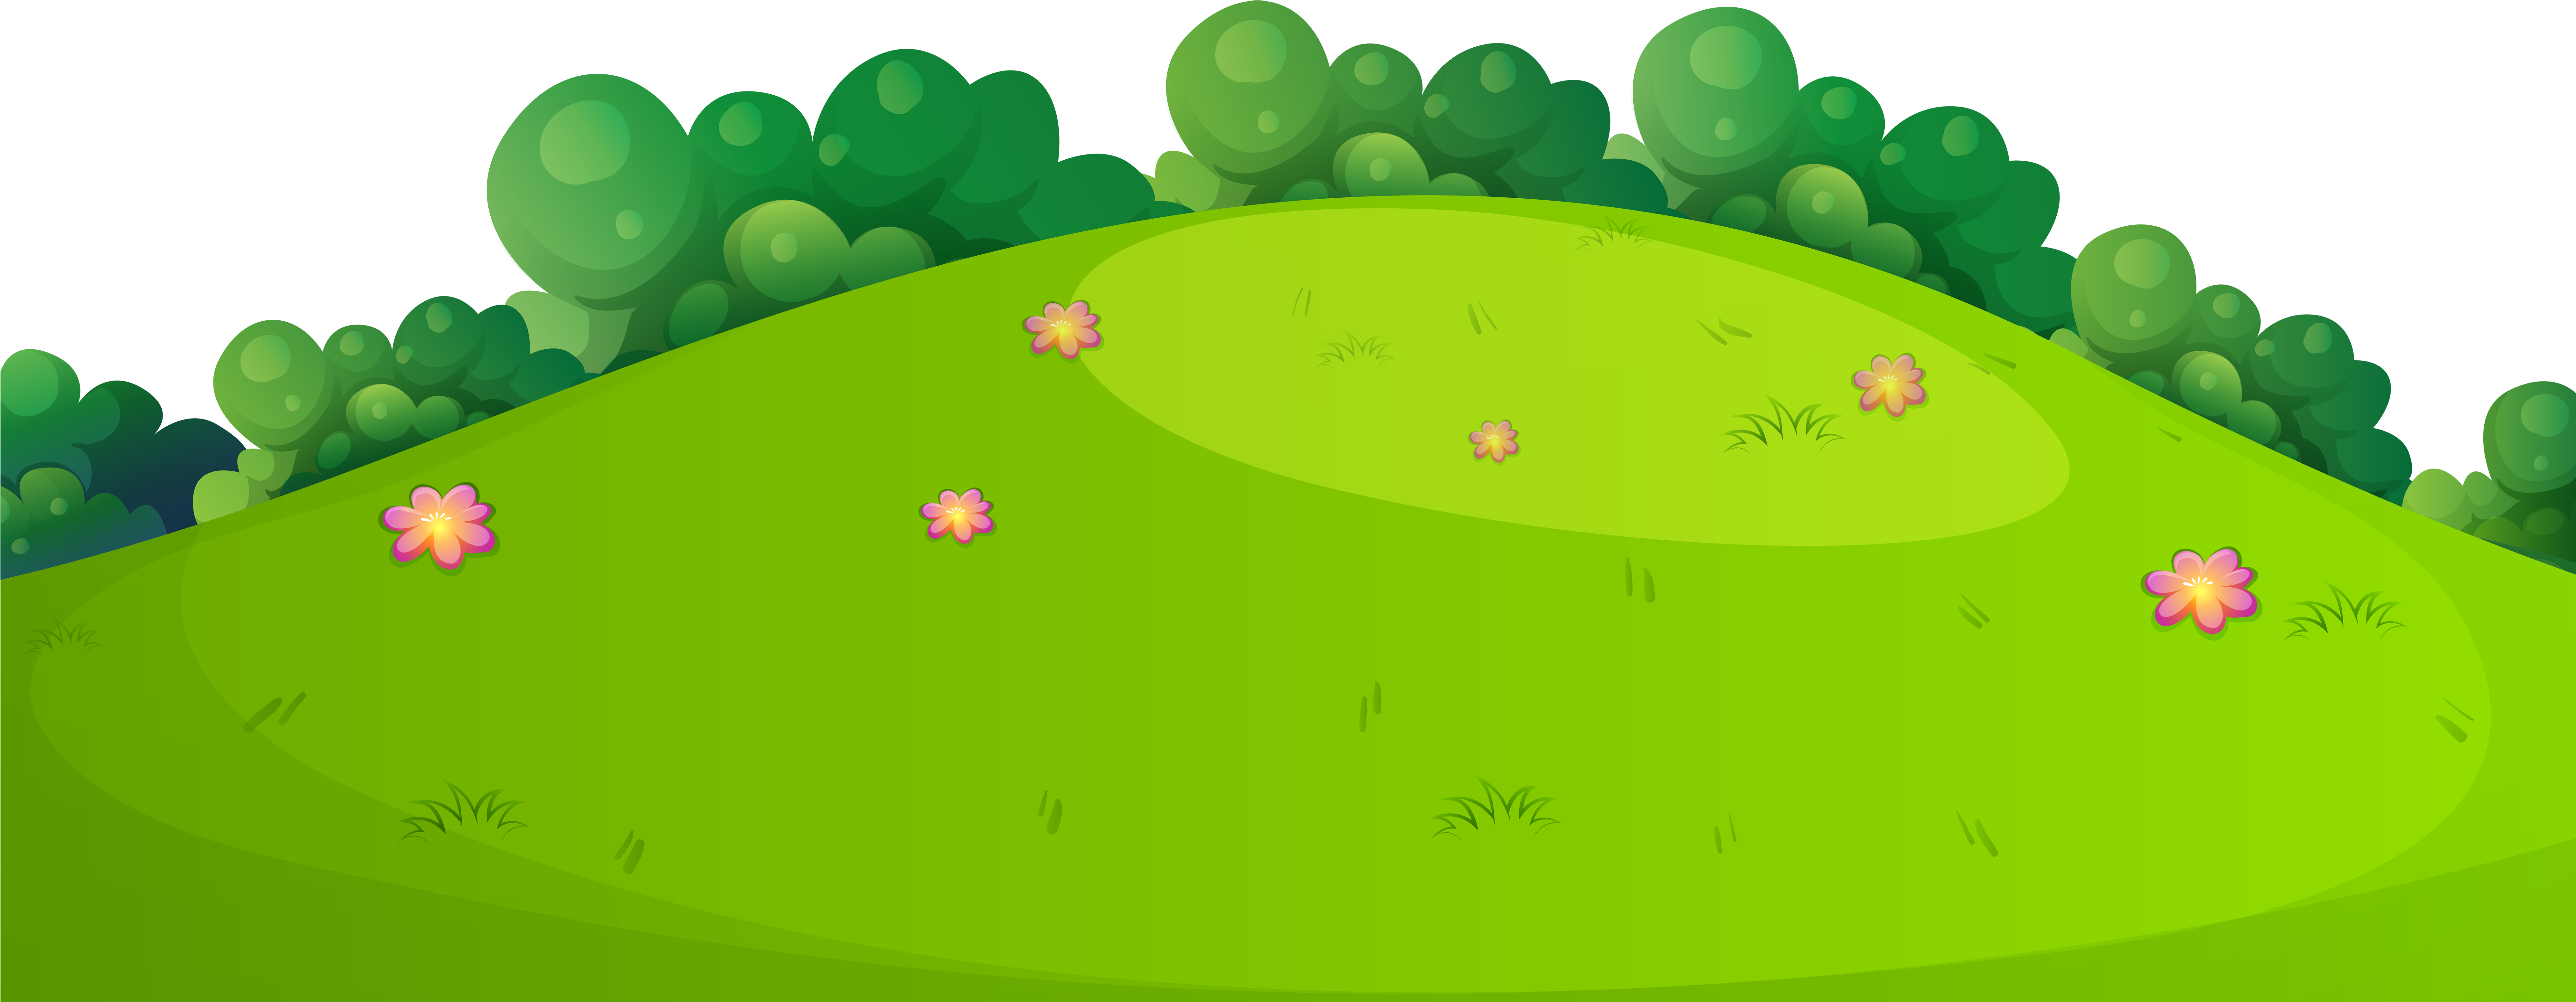 Meadow Greenscape Free Transparent Image HD PNG Image